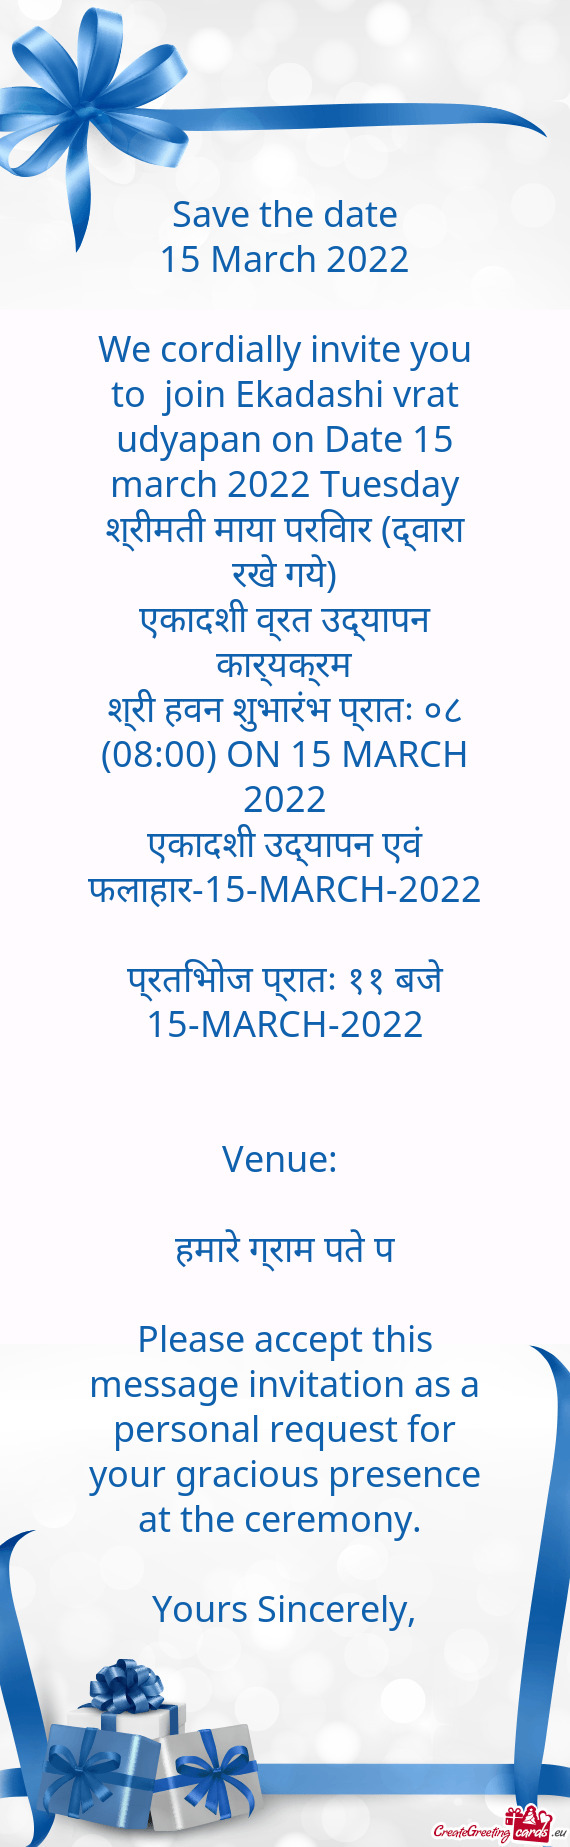 We cordially invite you to join Ekadashi vrat udyapan on Date 15 march 2022 Tuesday